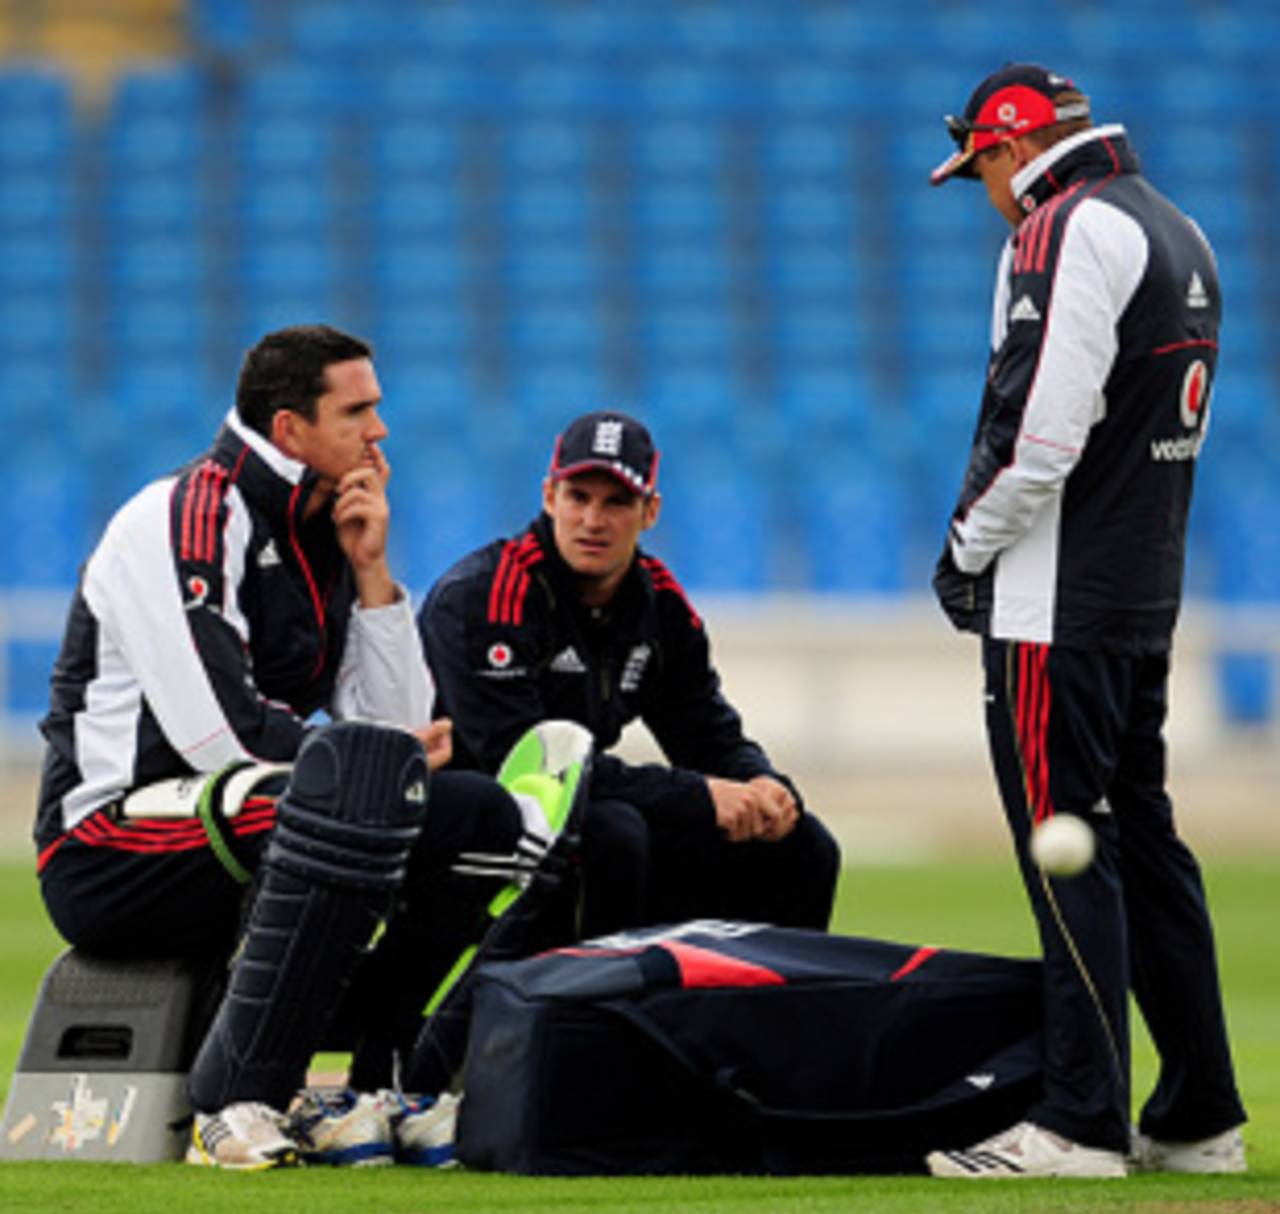 Kevin Pietersen, Andrew Strauss and Andy Flower discuss tactics ahead of the first ODI against West Indies, Headingley, April 20, 2009